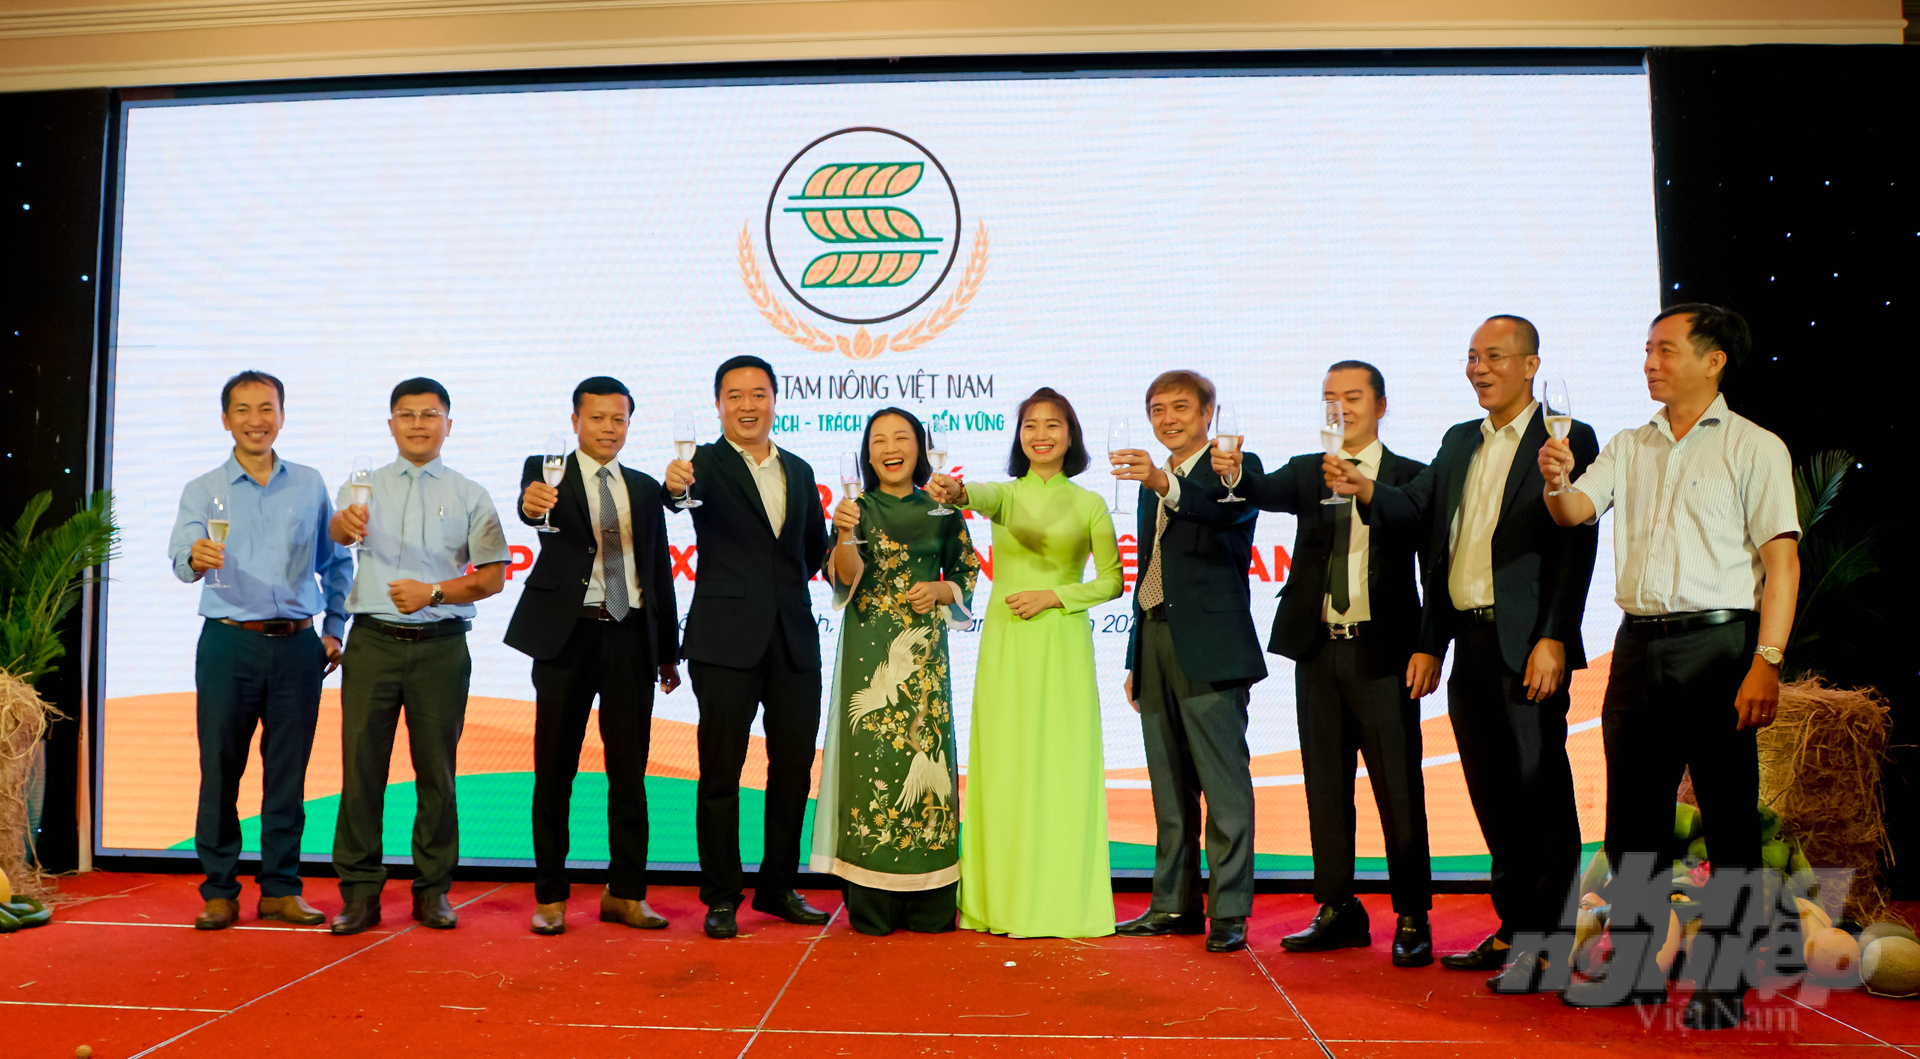 Launching ceremony of Vietnam Tam Nong Cooperative. Photo: Le Binh.